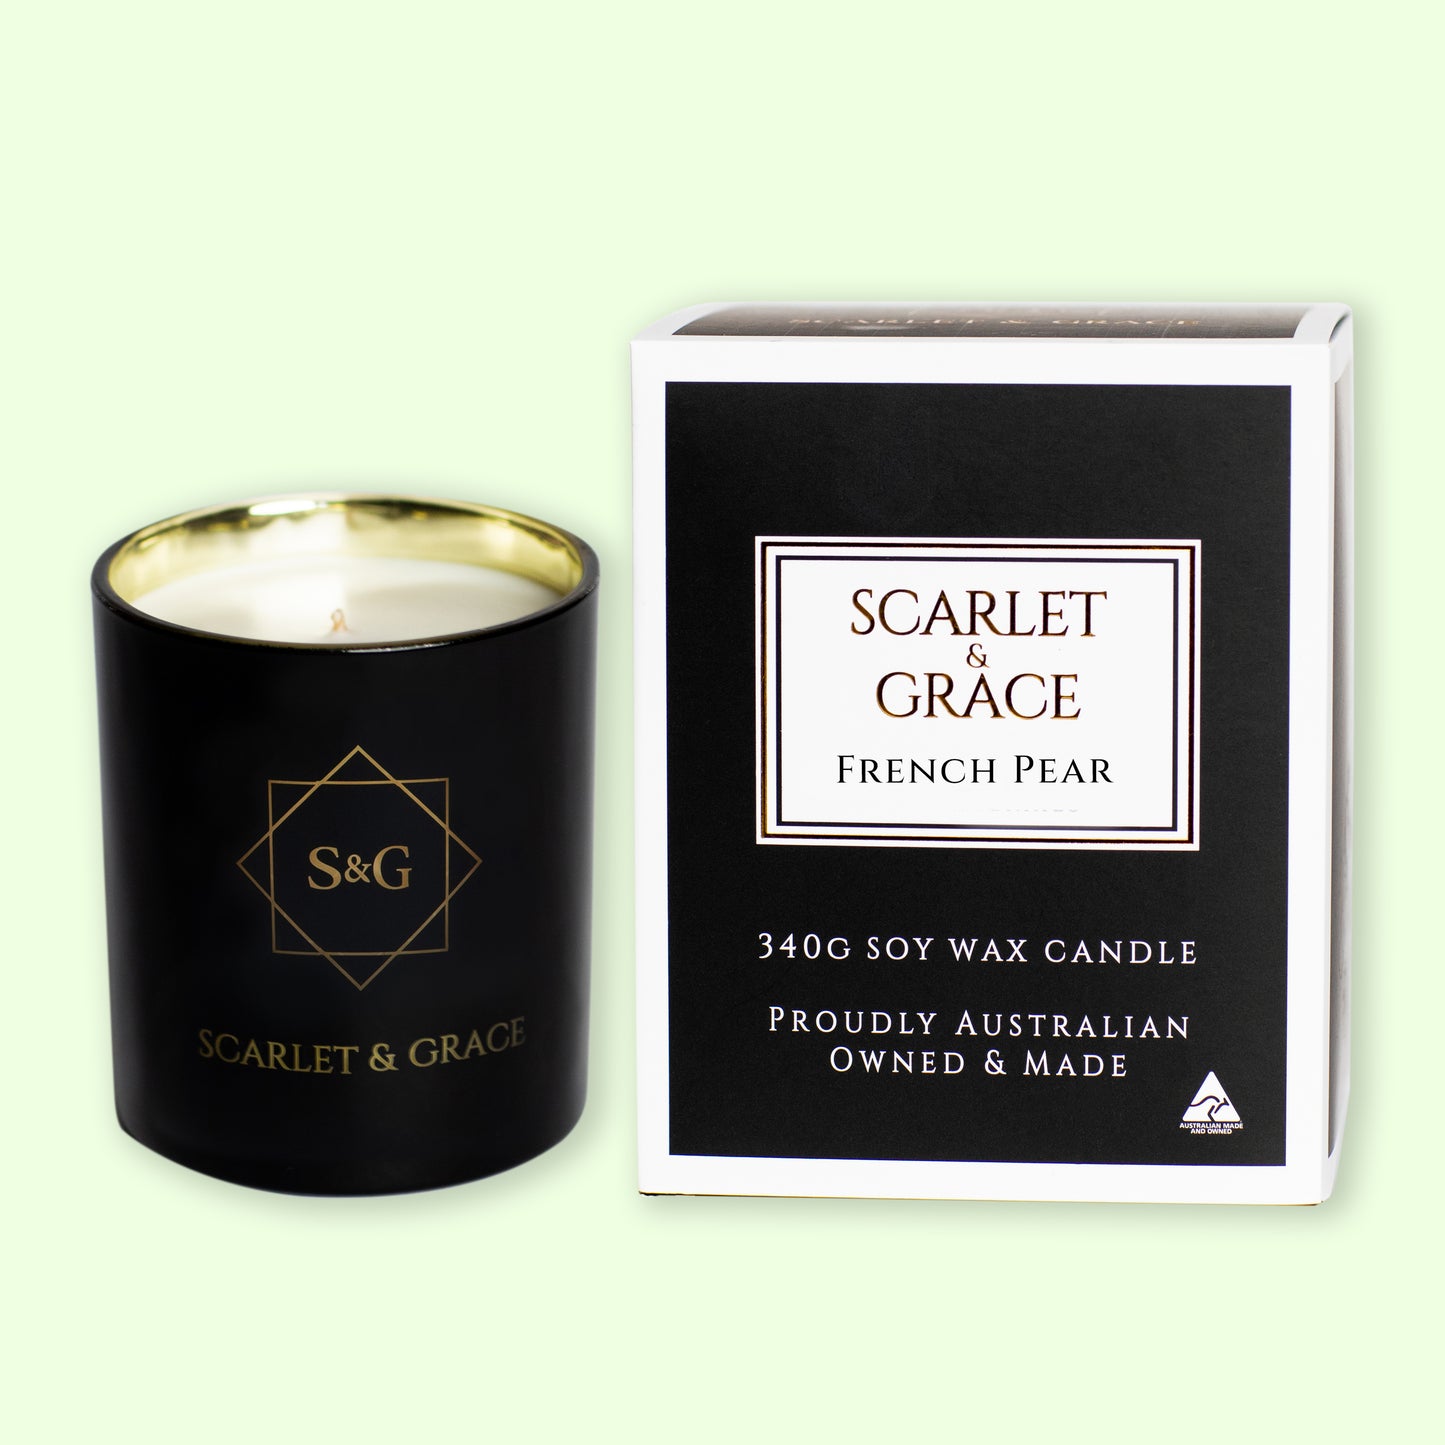 French Pear - 340gm Soy Wax Candle - Scarlet & Grace